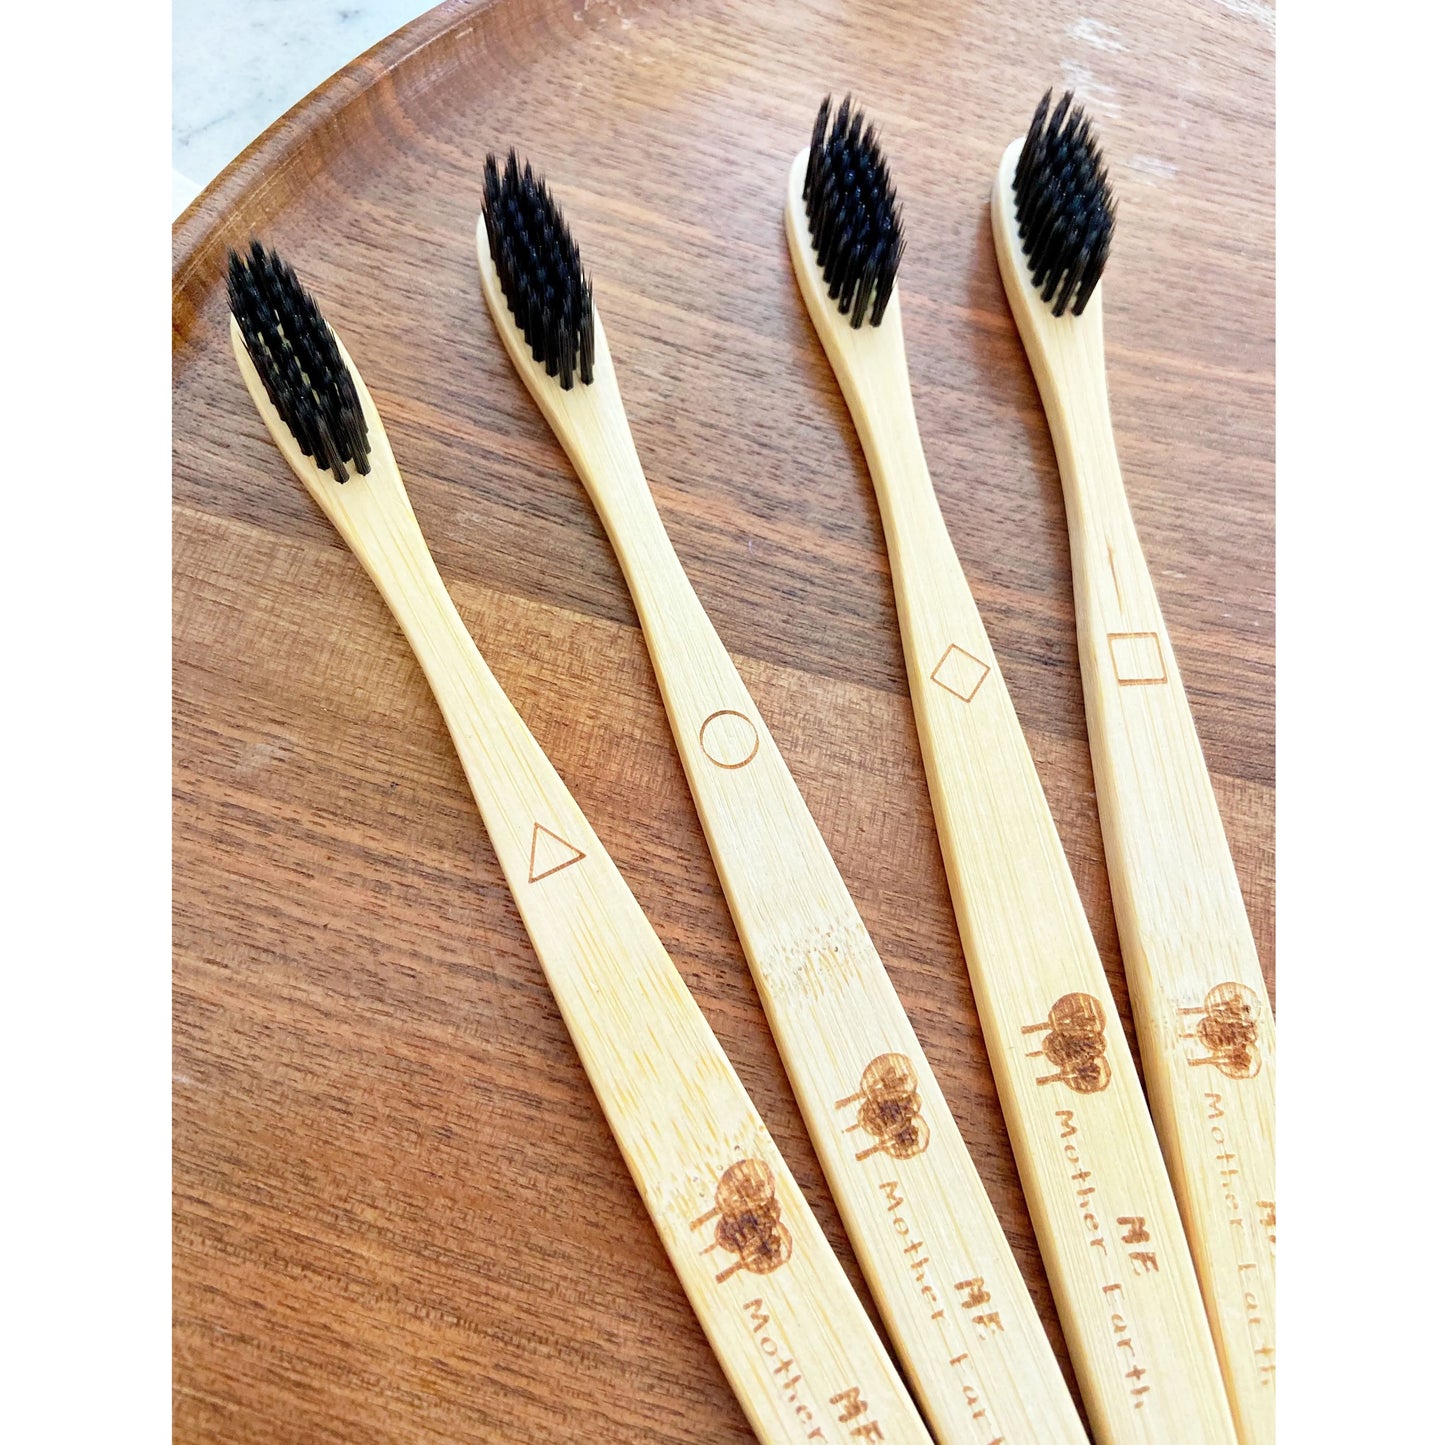 Bamboo Charcoal toothbrush - geometric markings for distinguishing users - sustainable - Bamboo toothbrush on walnut tray